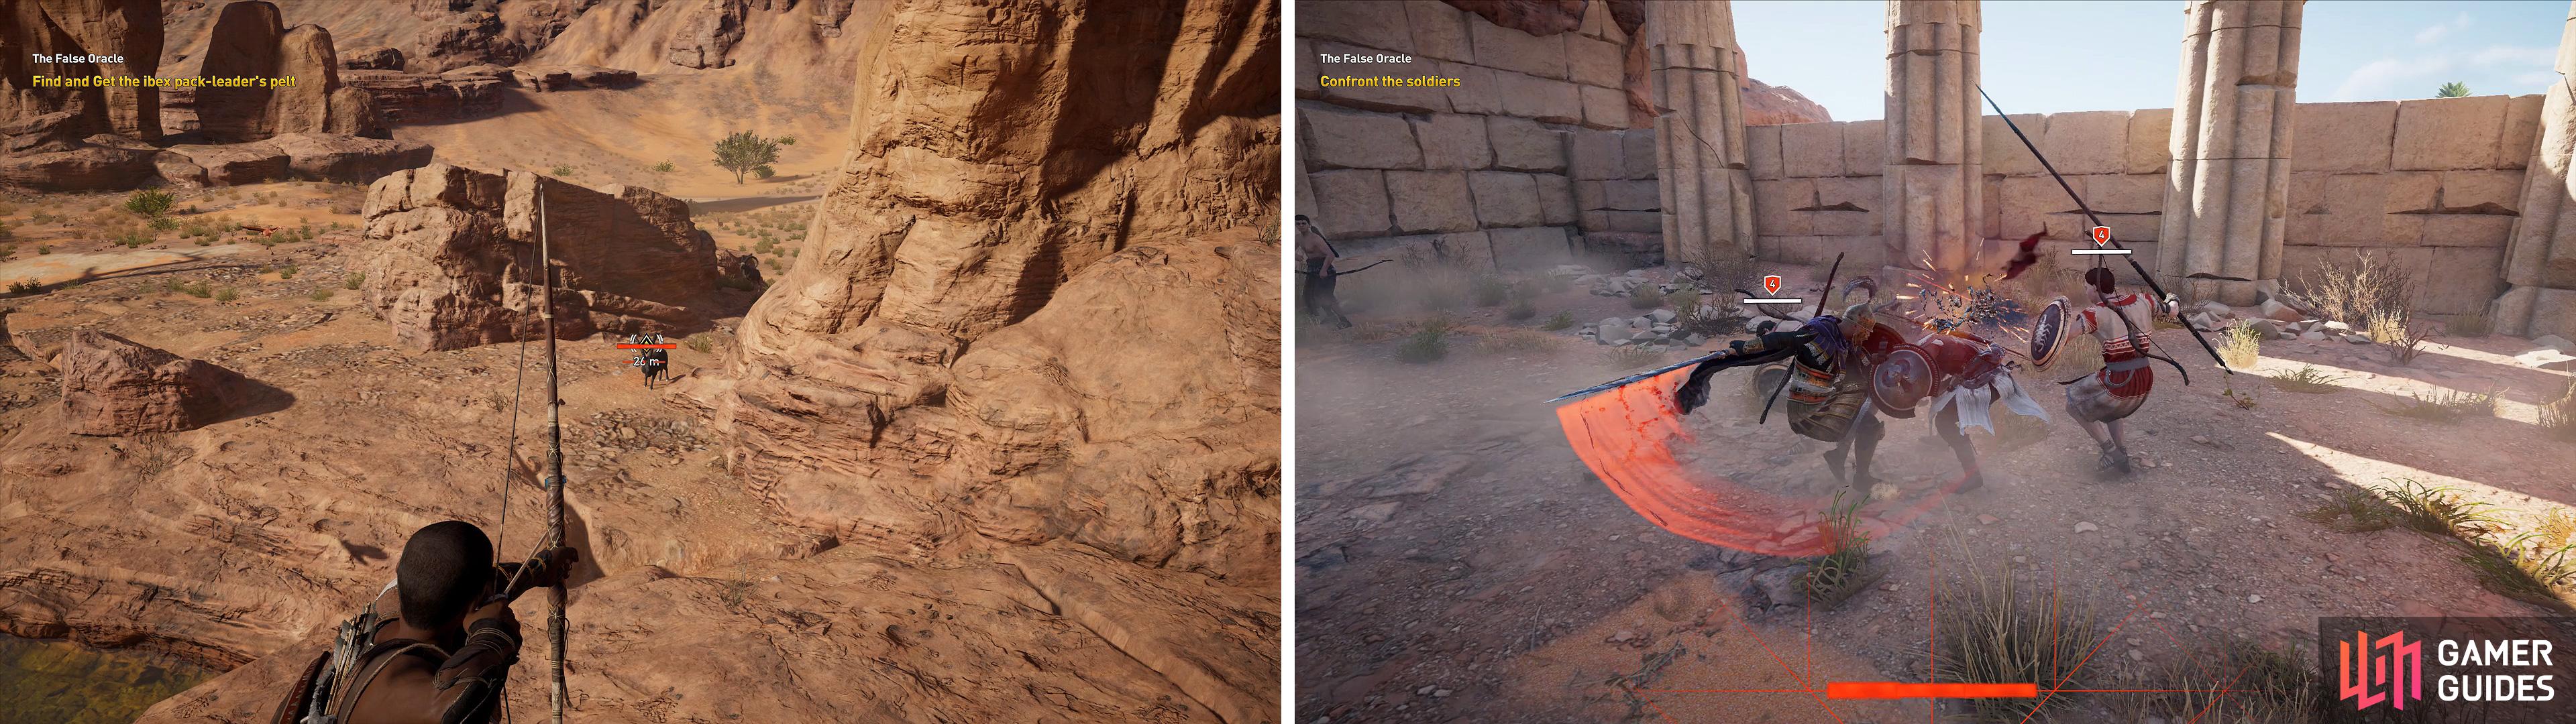 You can stand on this pillar to kill the Ibis (left). After the scenes, Bayek will try to fight but you cannot win (right).